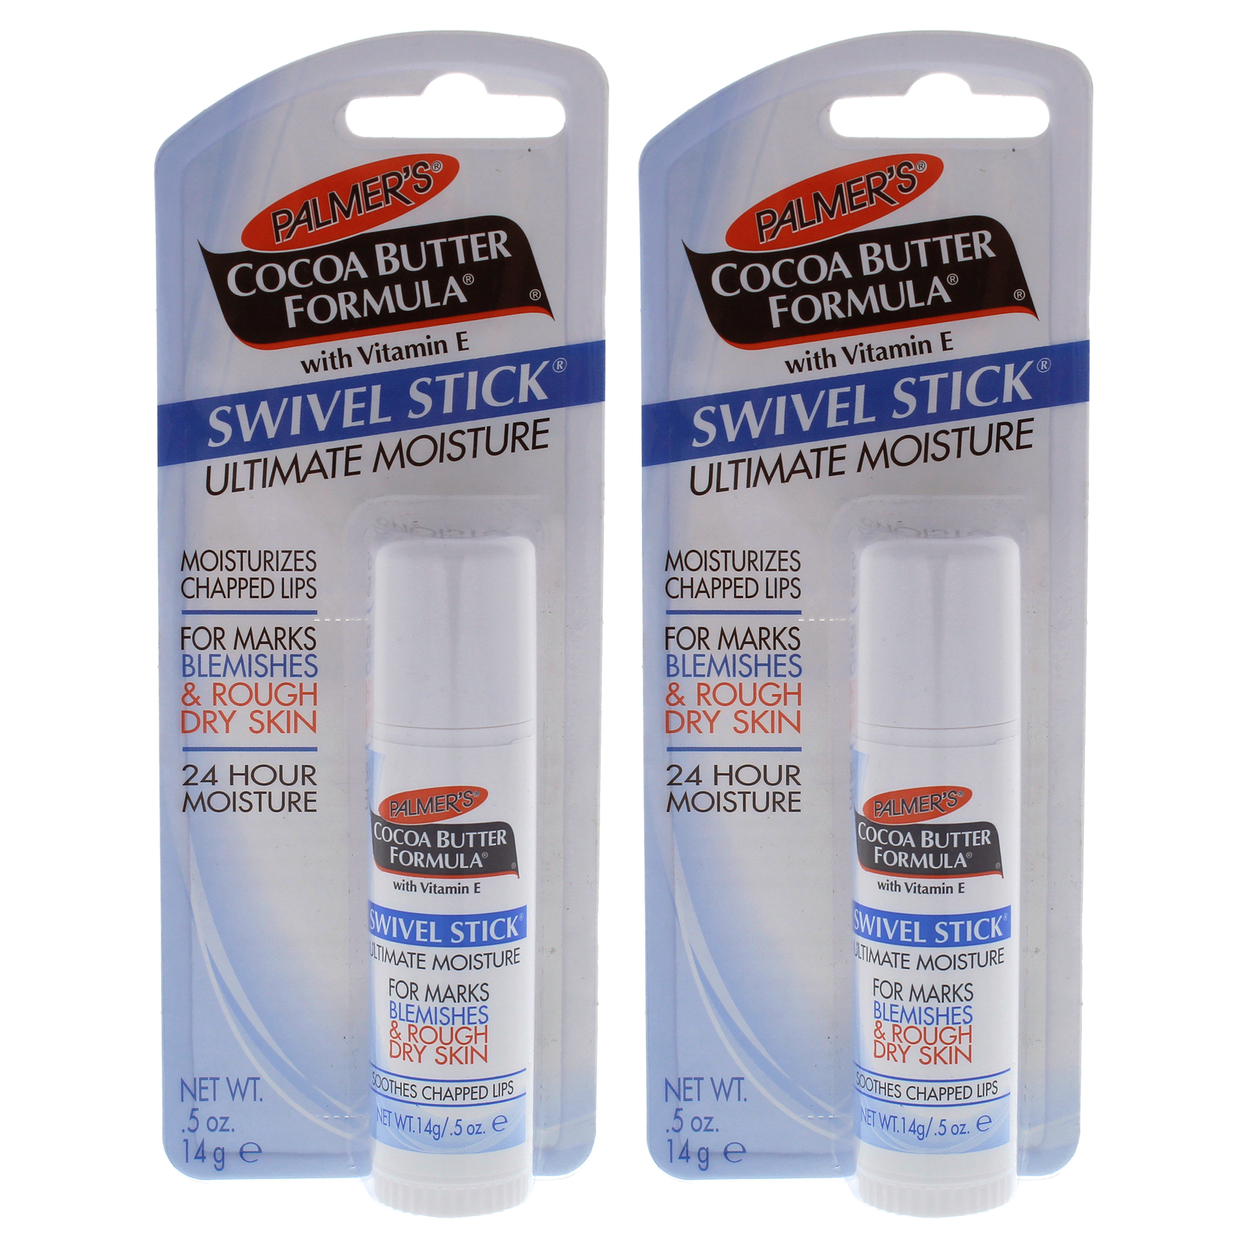 Palmers Cocoa Butter Formula Swivel Stick - Pack Of 2 Chap Stick 0.5 Oz